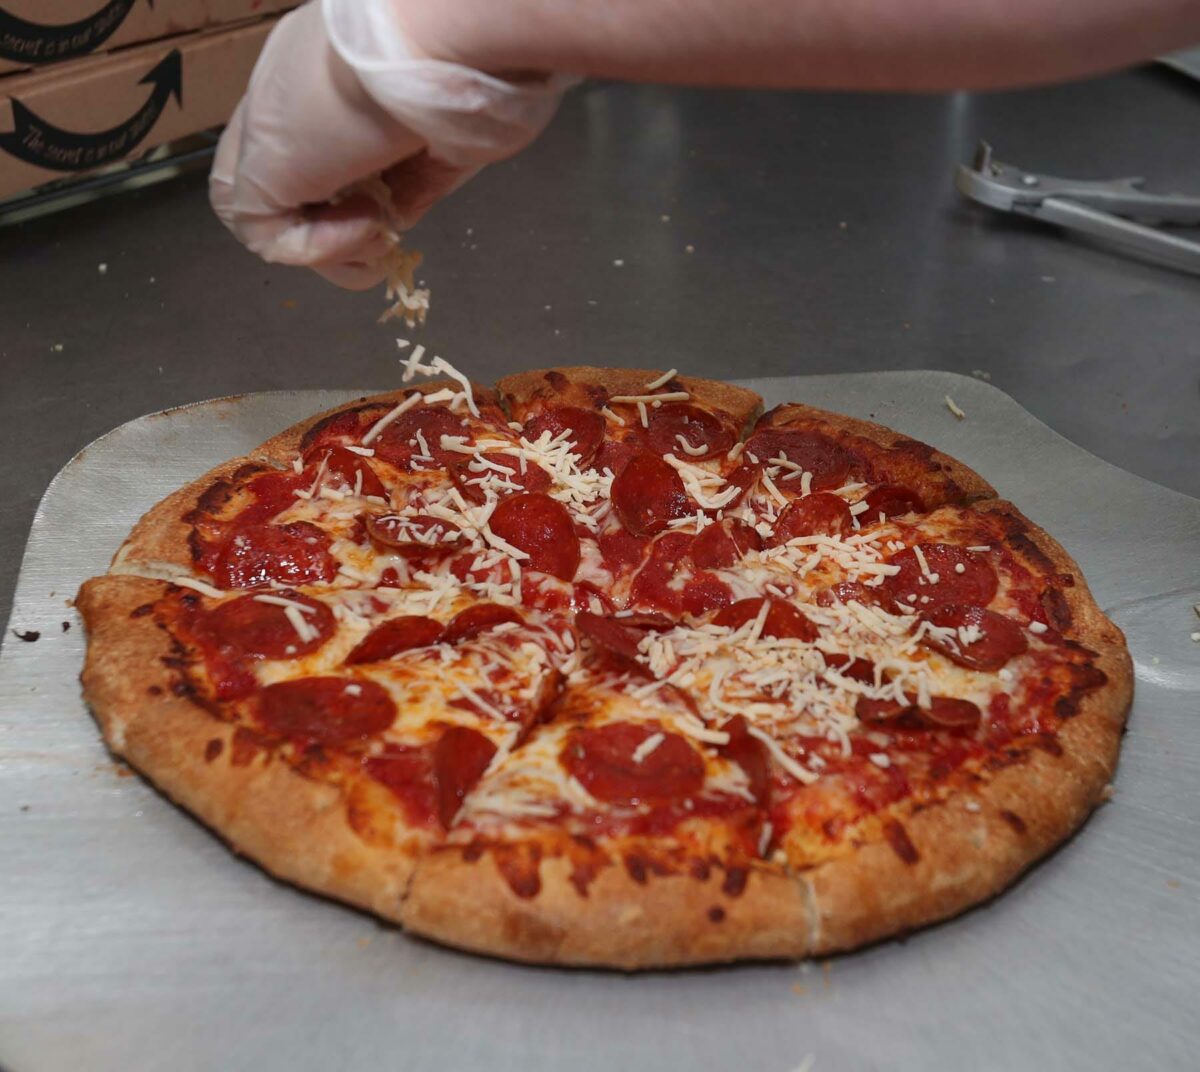 The 10 largest pizza chains in the United States